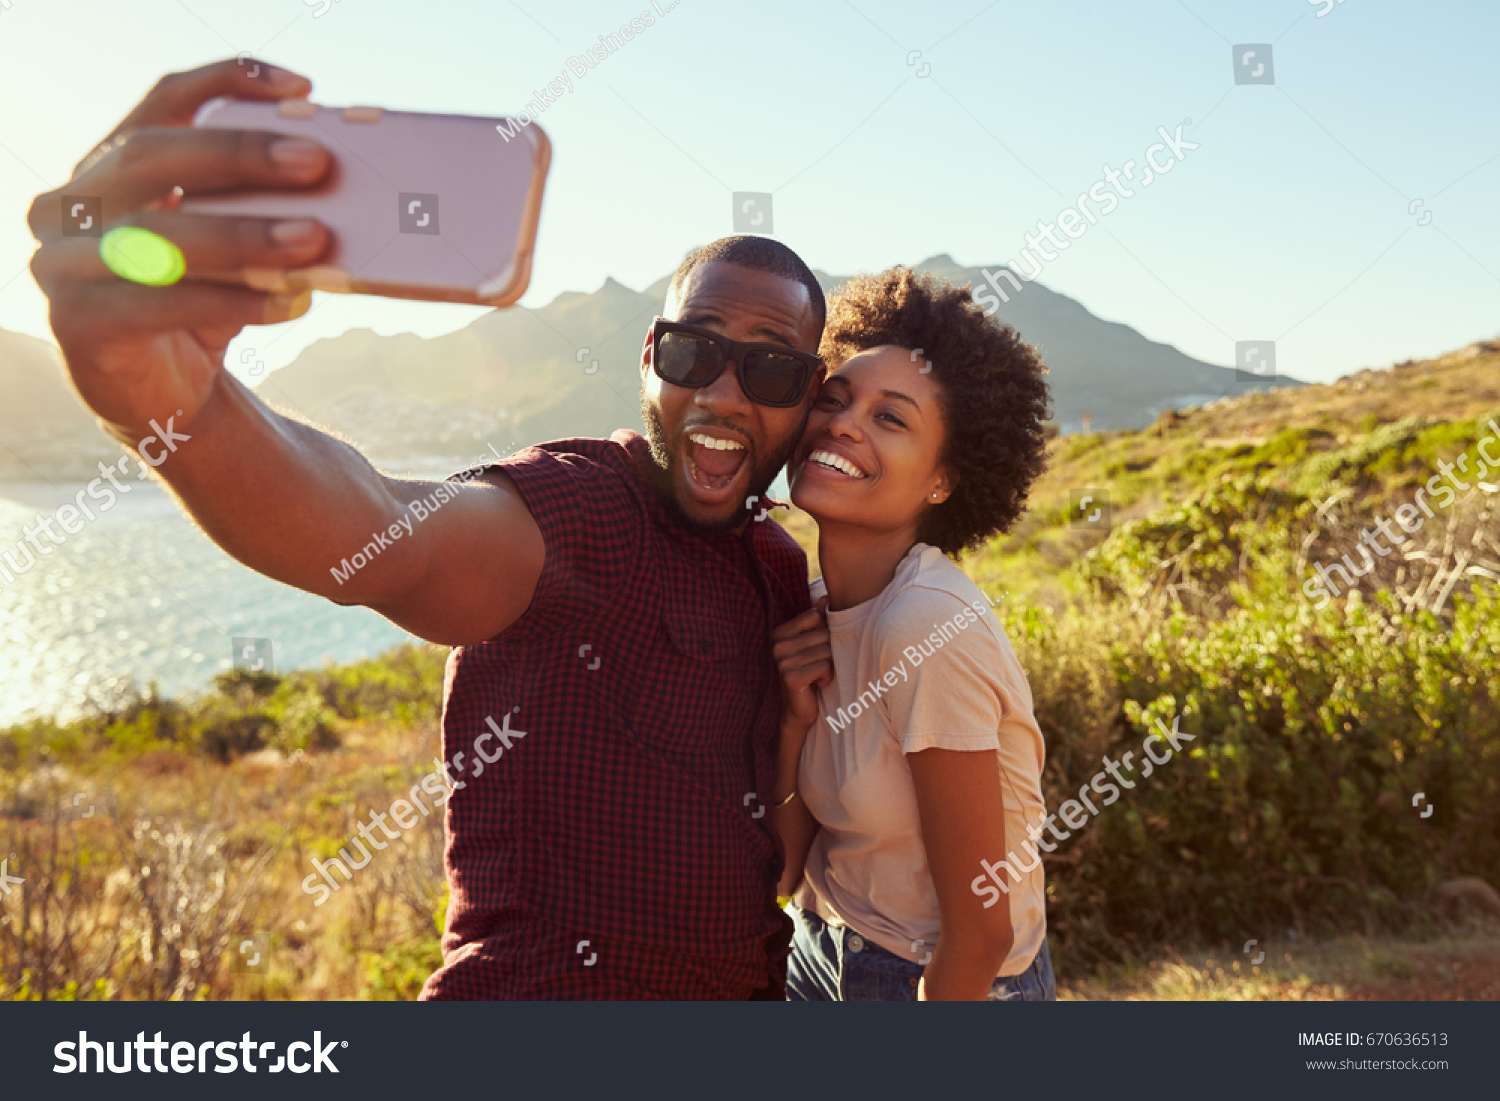 Young Couple Pose For Holiday Selfie On Clifftop #670636513